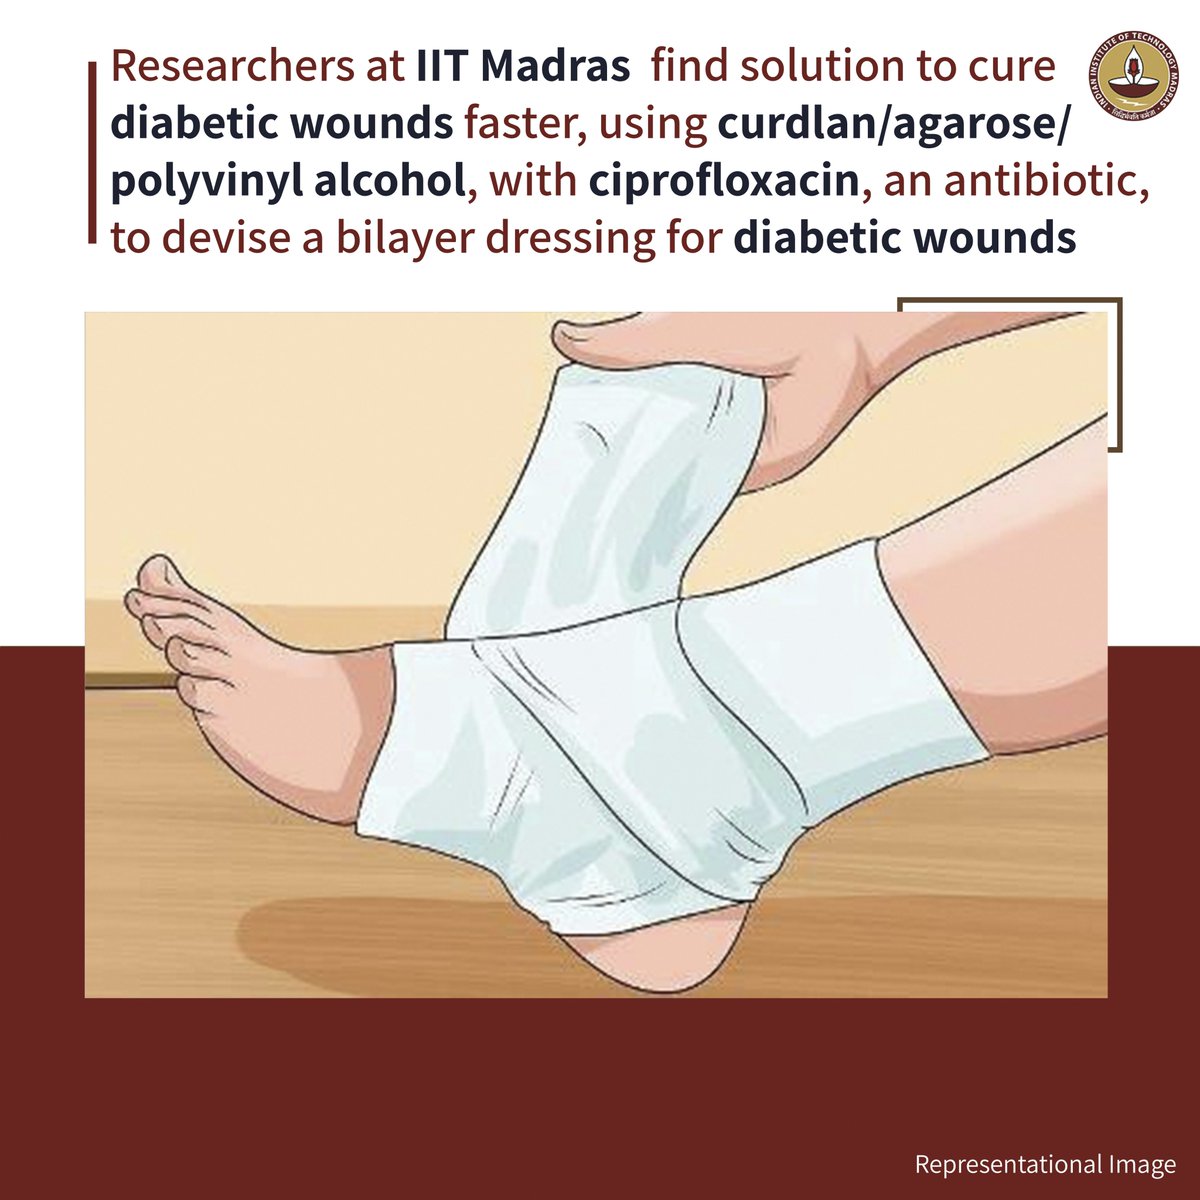 #TechTuesday Researchers at @iitmadras find solution to cure diabetic wounds faster, using curdlan/agarose/polyvinyl alcohol, with ciprofloxacin, an antibiotic, to devise a bilayer dressing for diabetic wounds. Read the full article: tech-talk.iitm.ac.in/a-diabetic-wou… #cure #diabetes